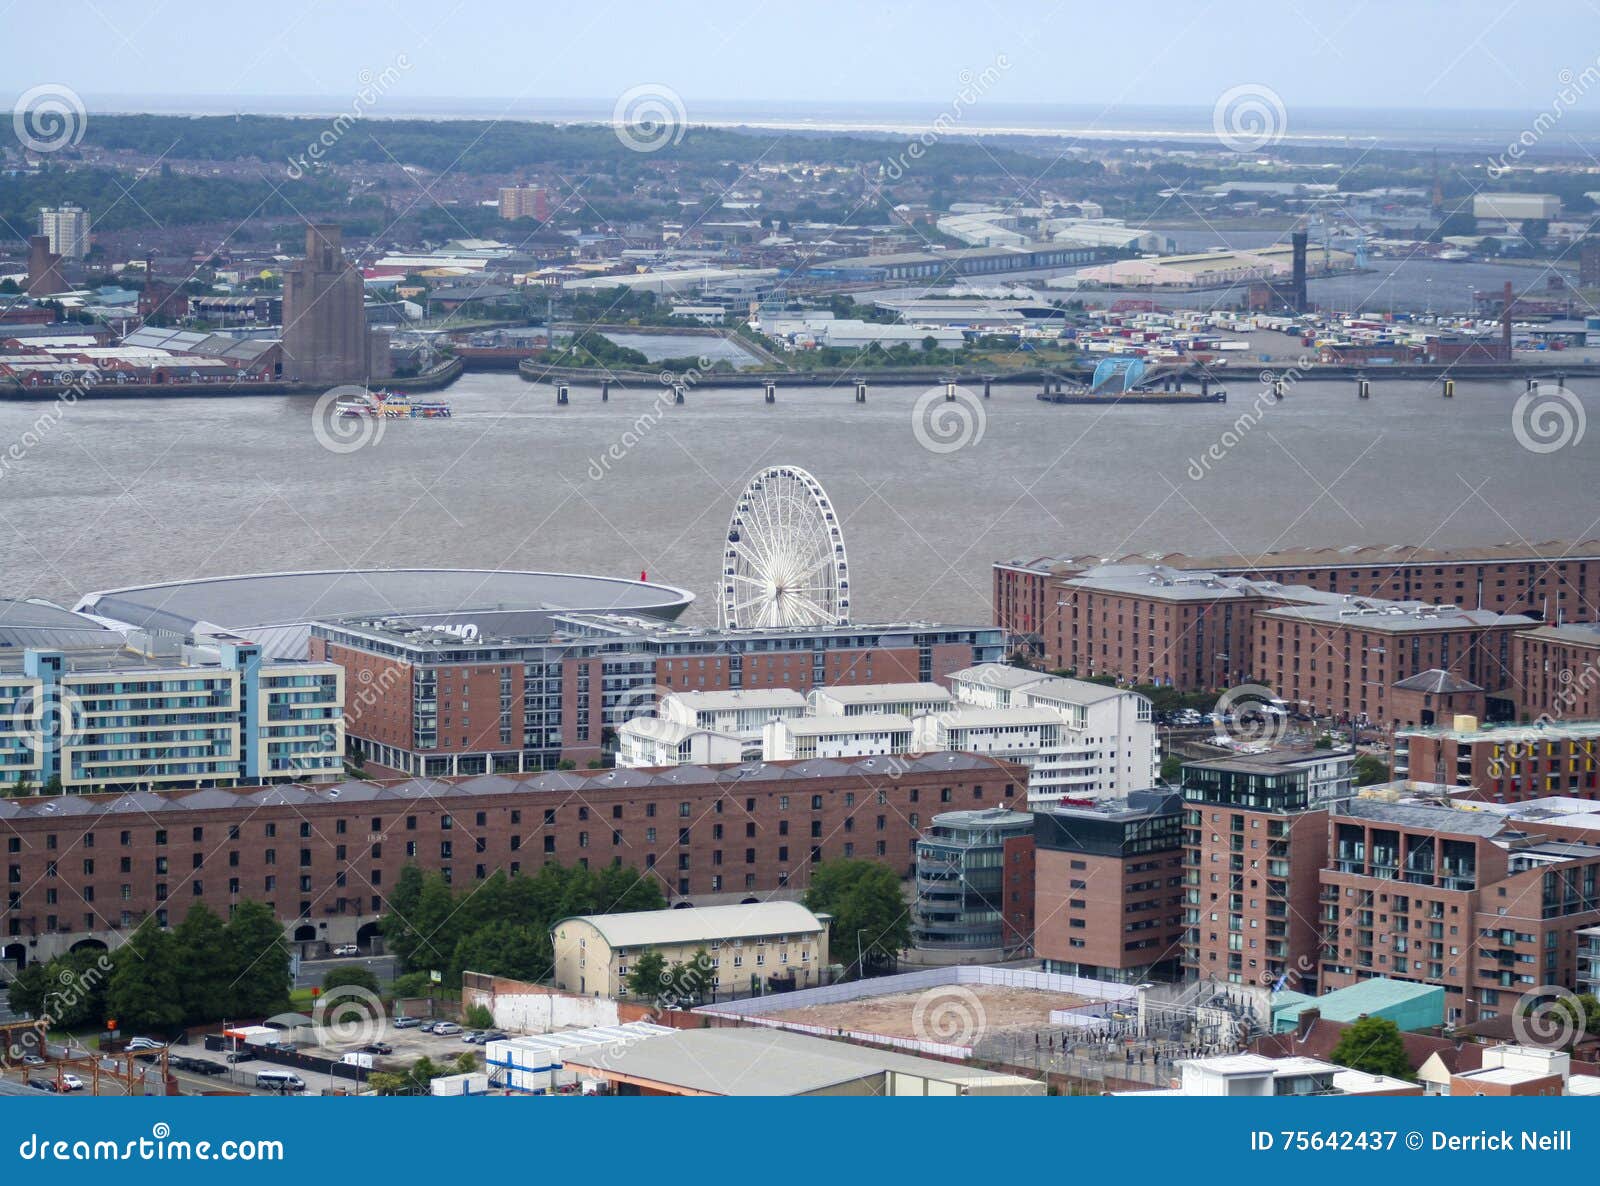 An Aerial View of Liverpool Looking Northwest Editorial Photography ...